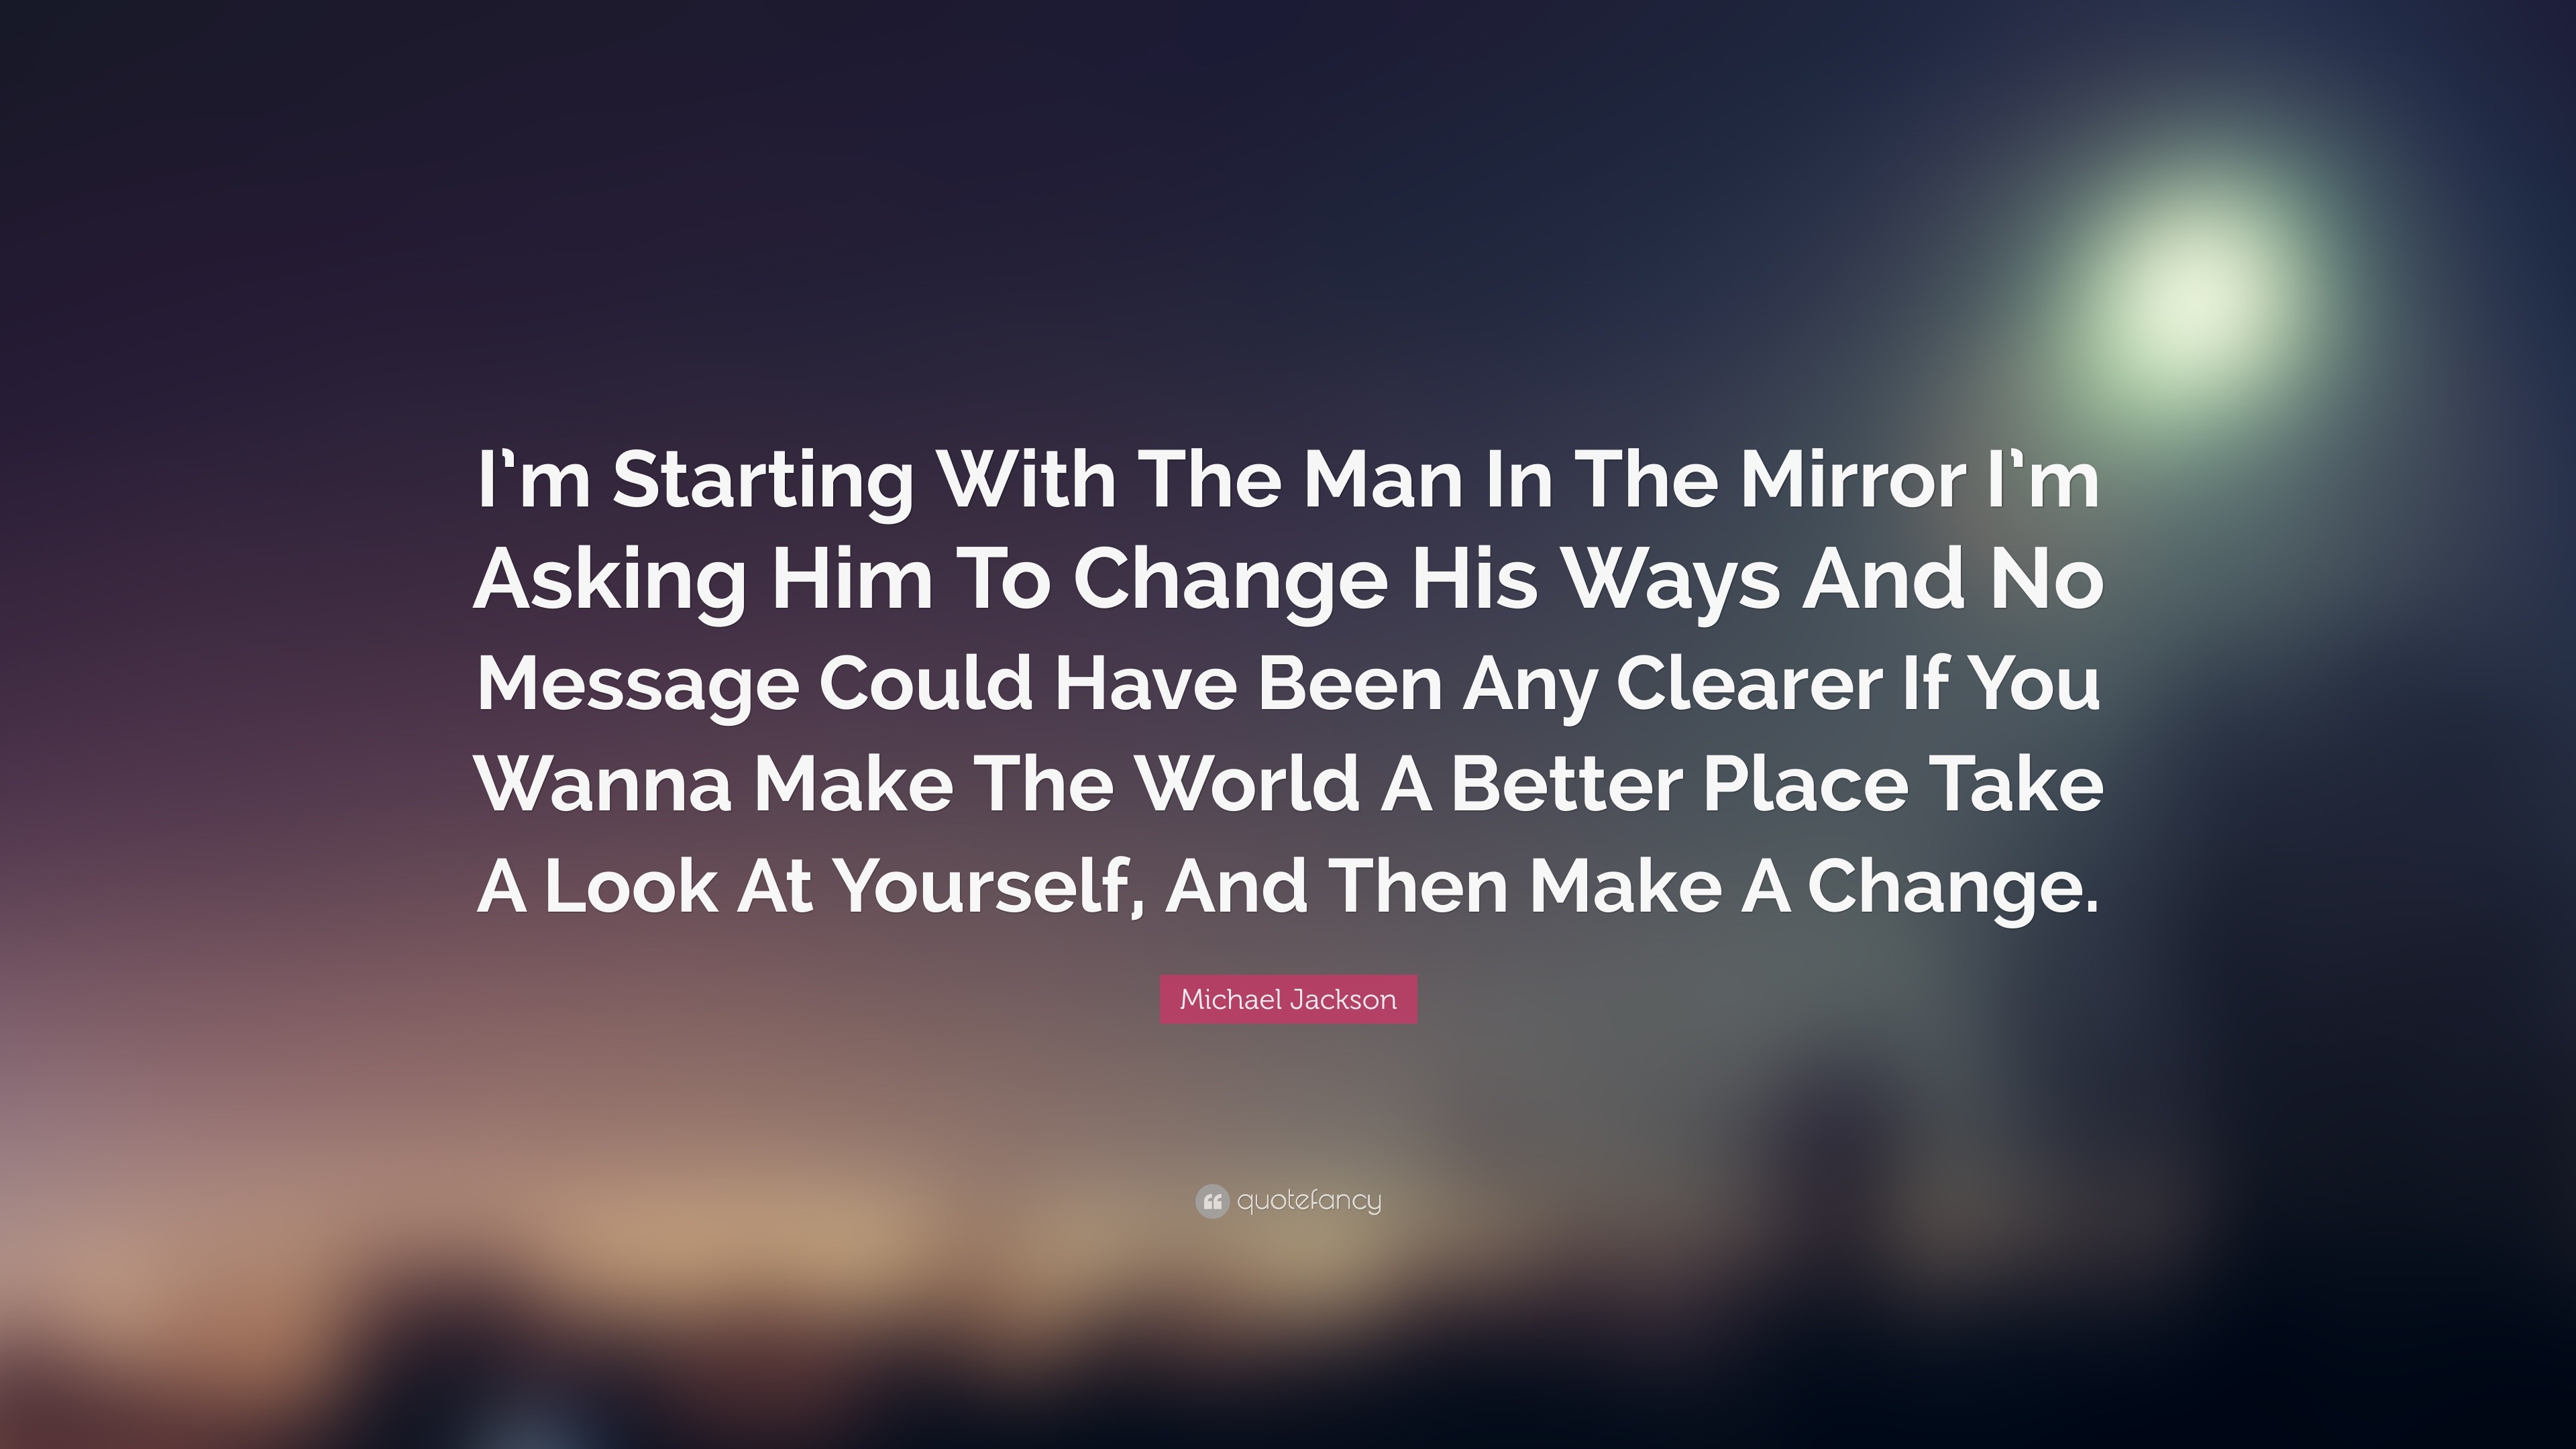 Michael Jackson Quote: “I'm Starting With The Man In The Mirror I'm Asking Him To Change His Ways And No Message Could Have Been Any Clearer If ...”